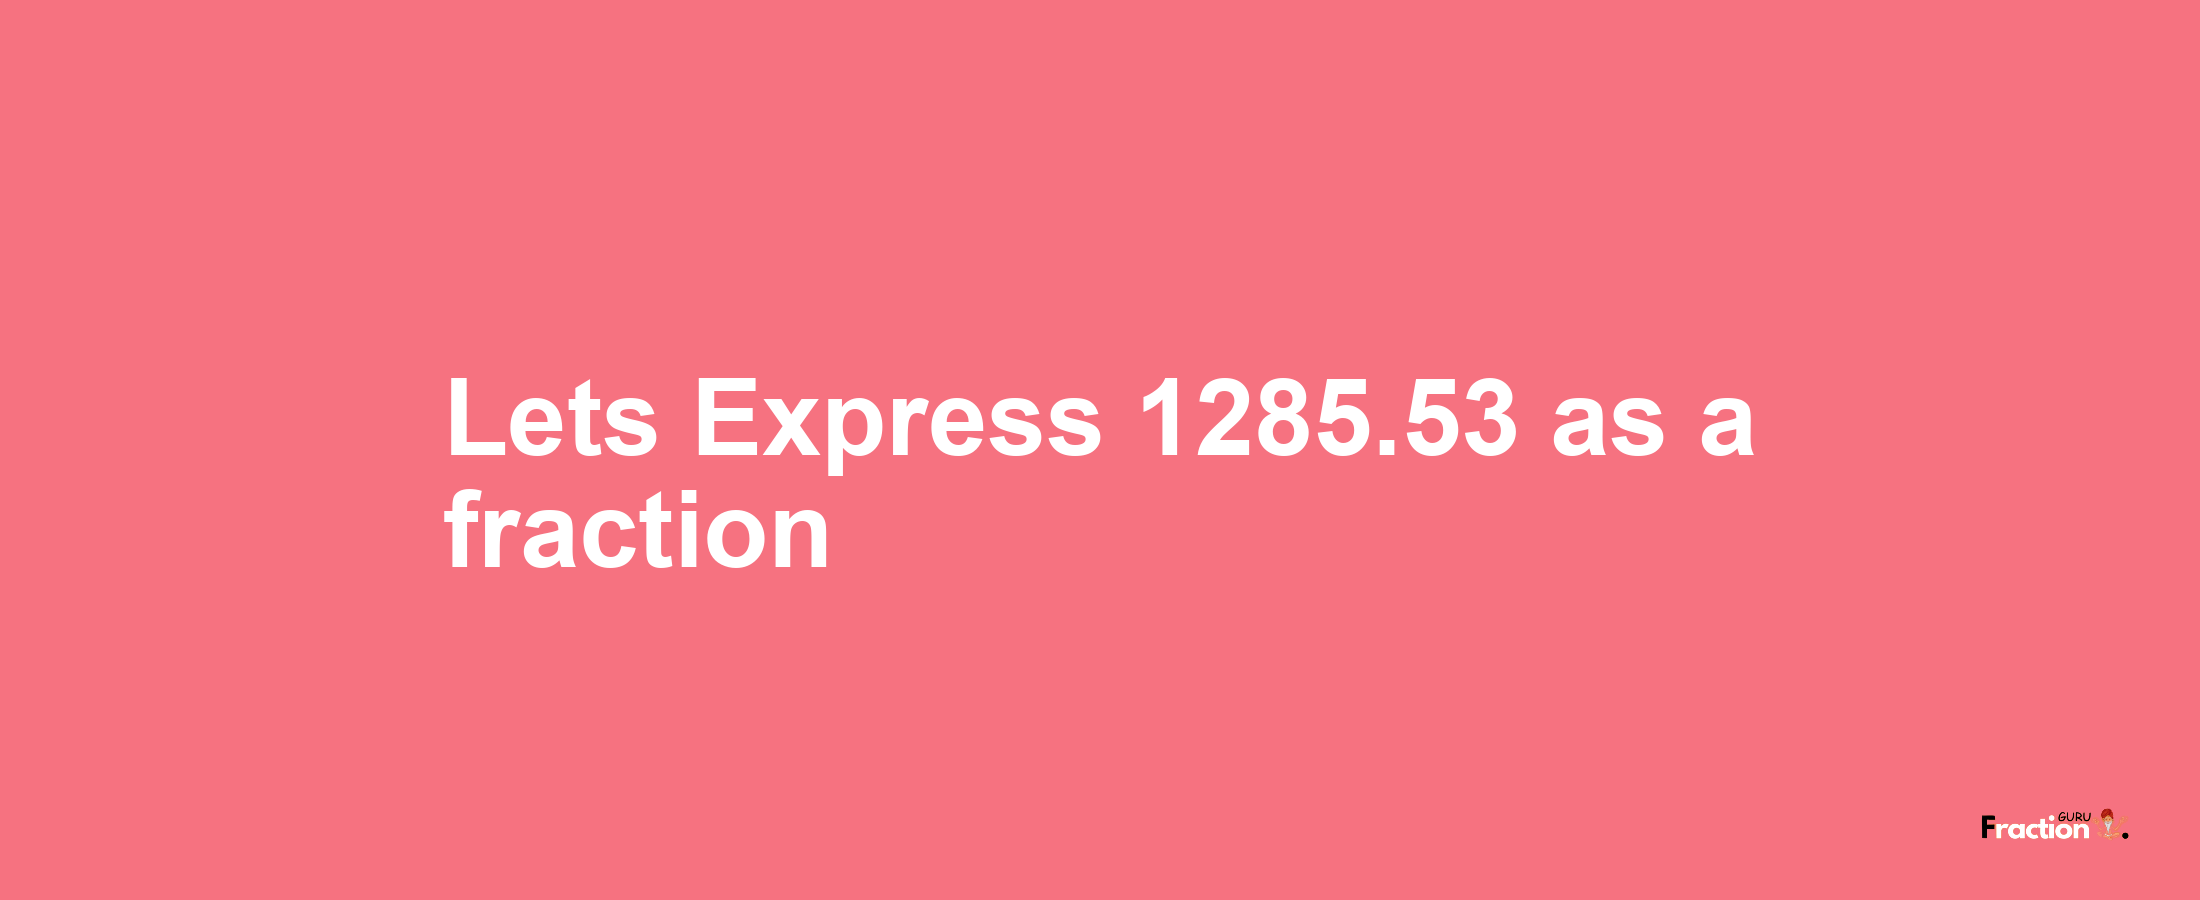 Lets Express 1285.53 as afraction